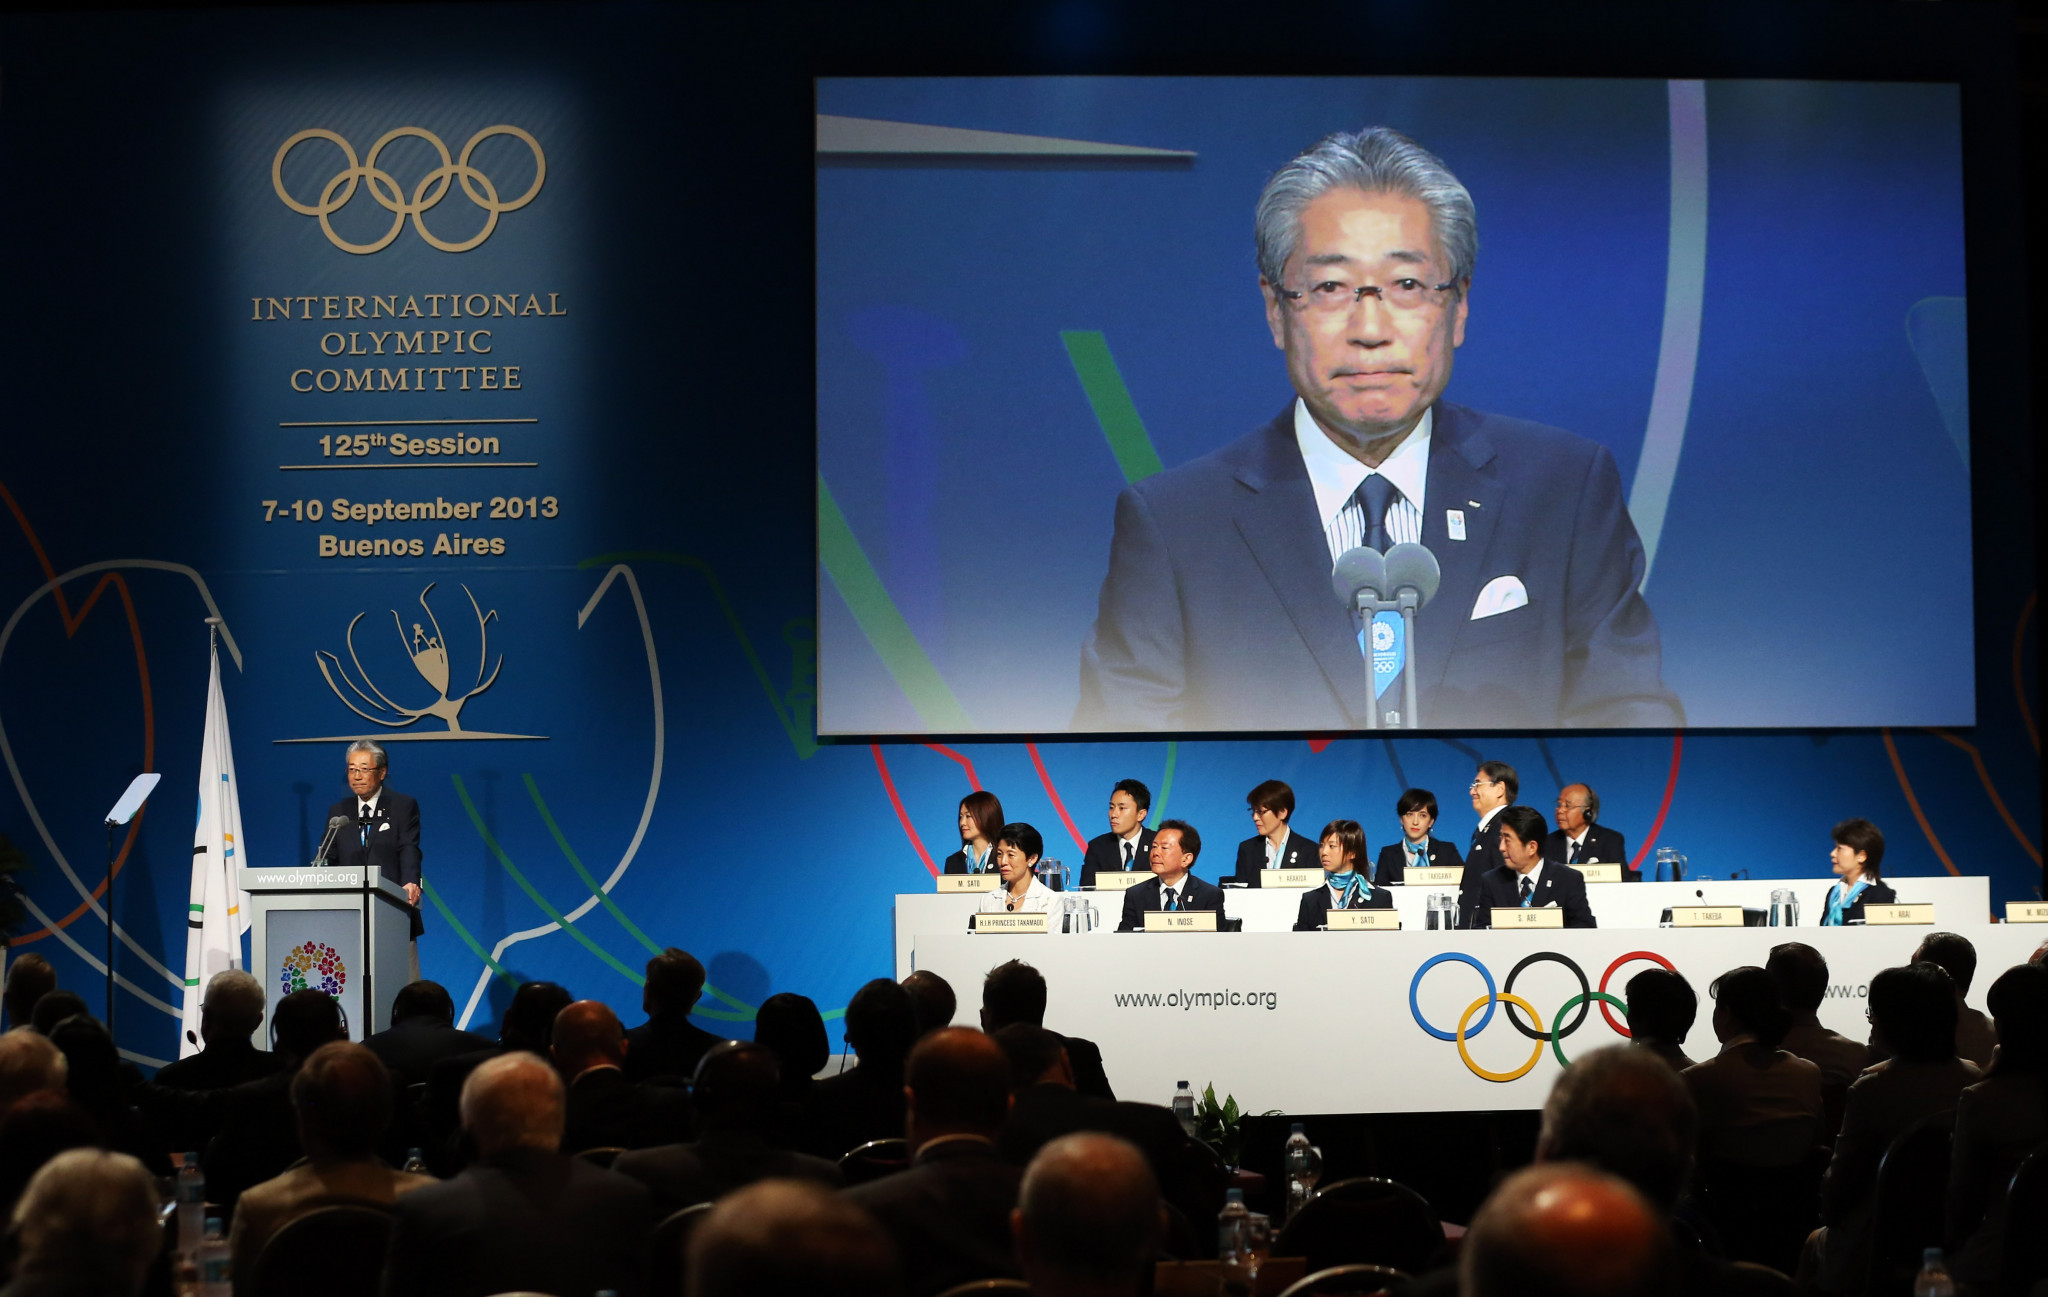 Tsunekazu Takeda played a leading role in Tokyo's successful bid for the 2020 Olympic and Paralympic Games ©Getty Images